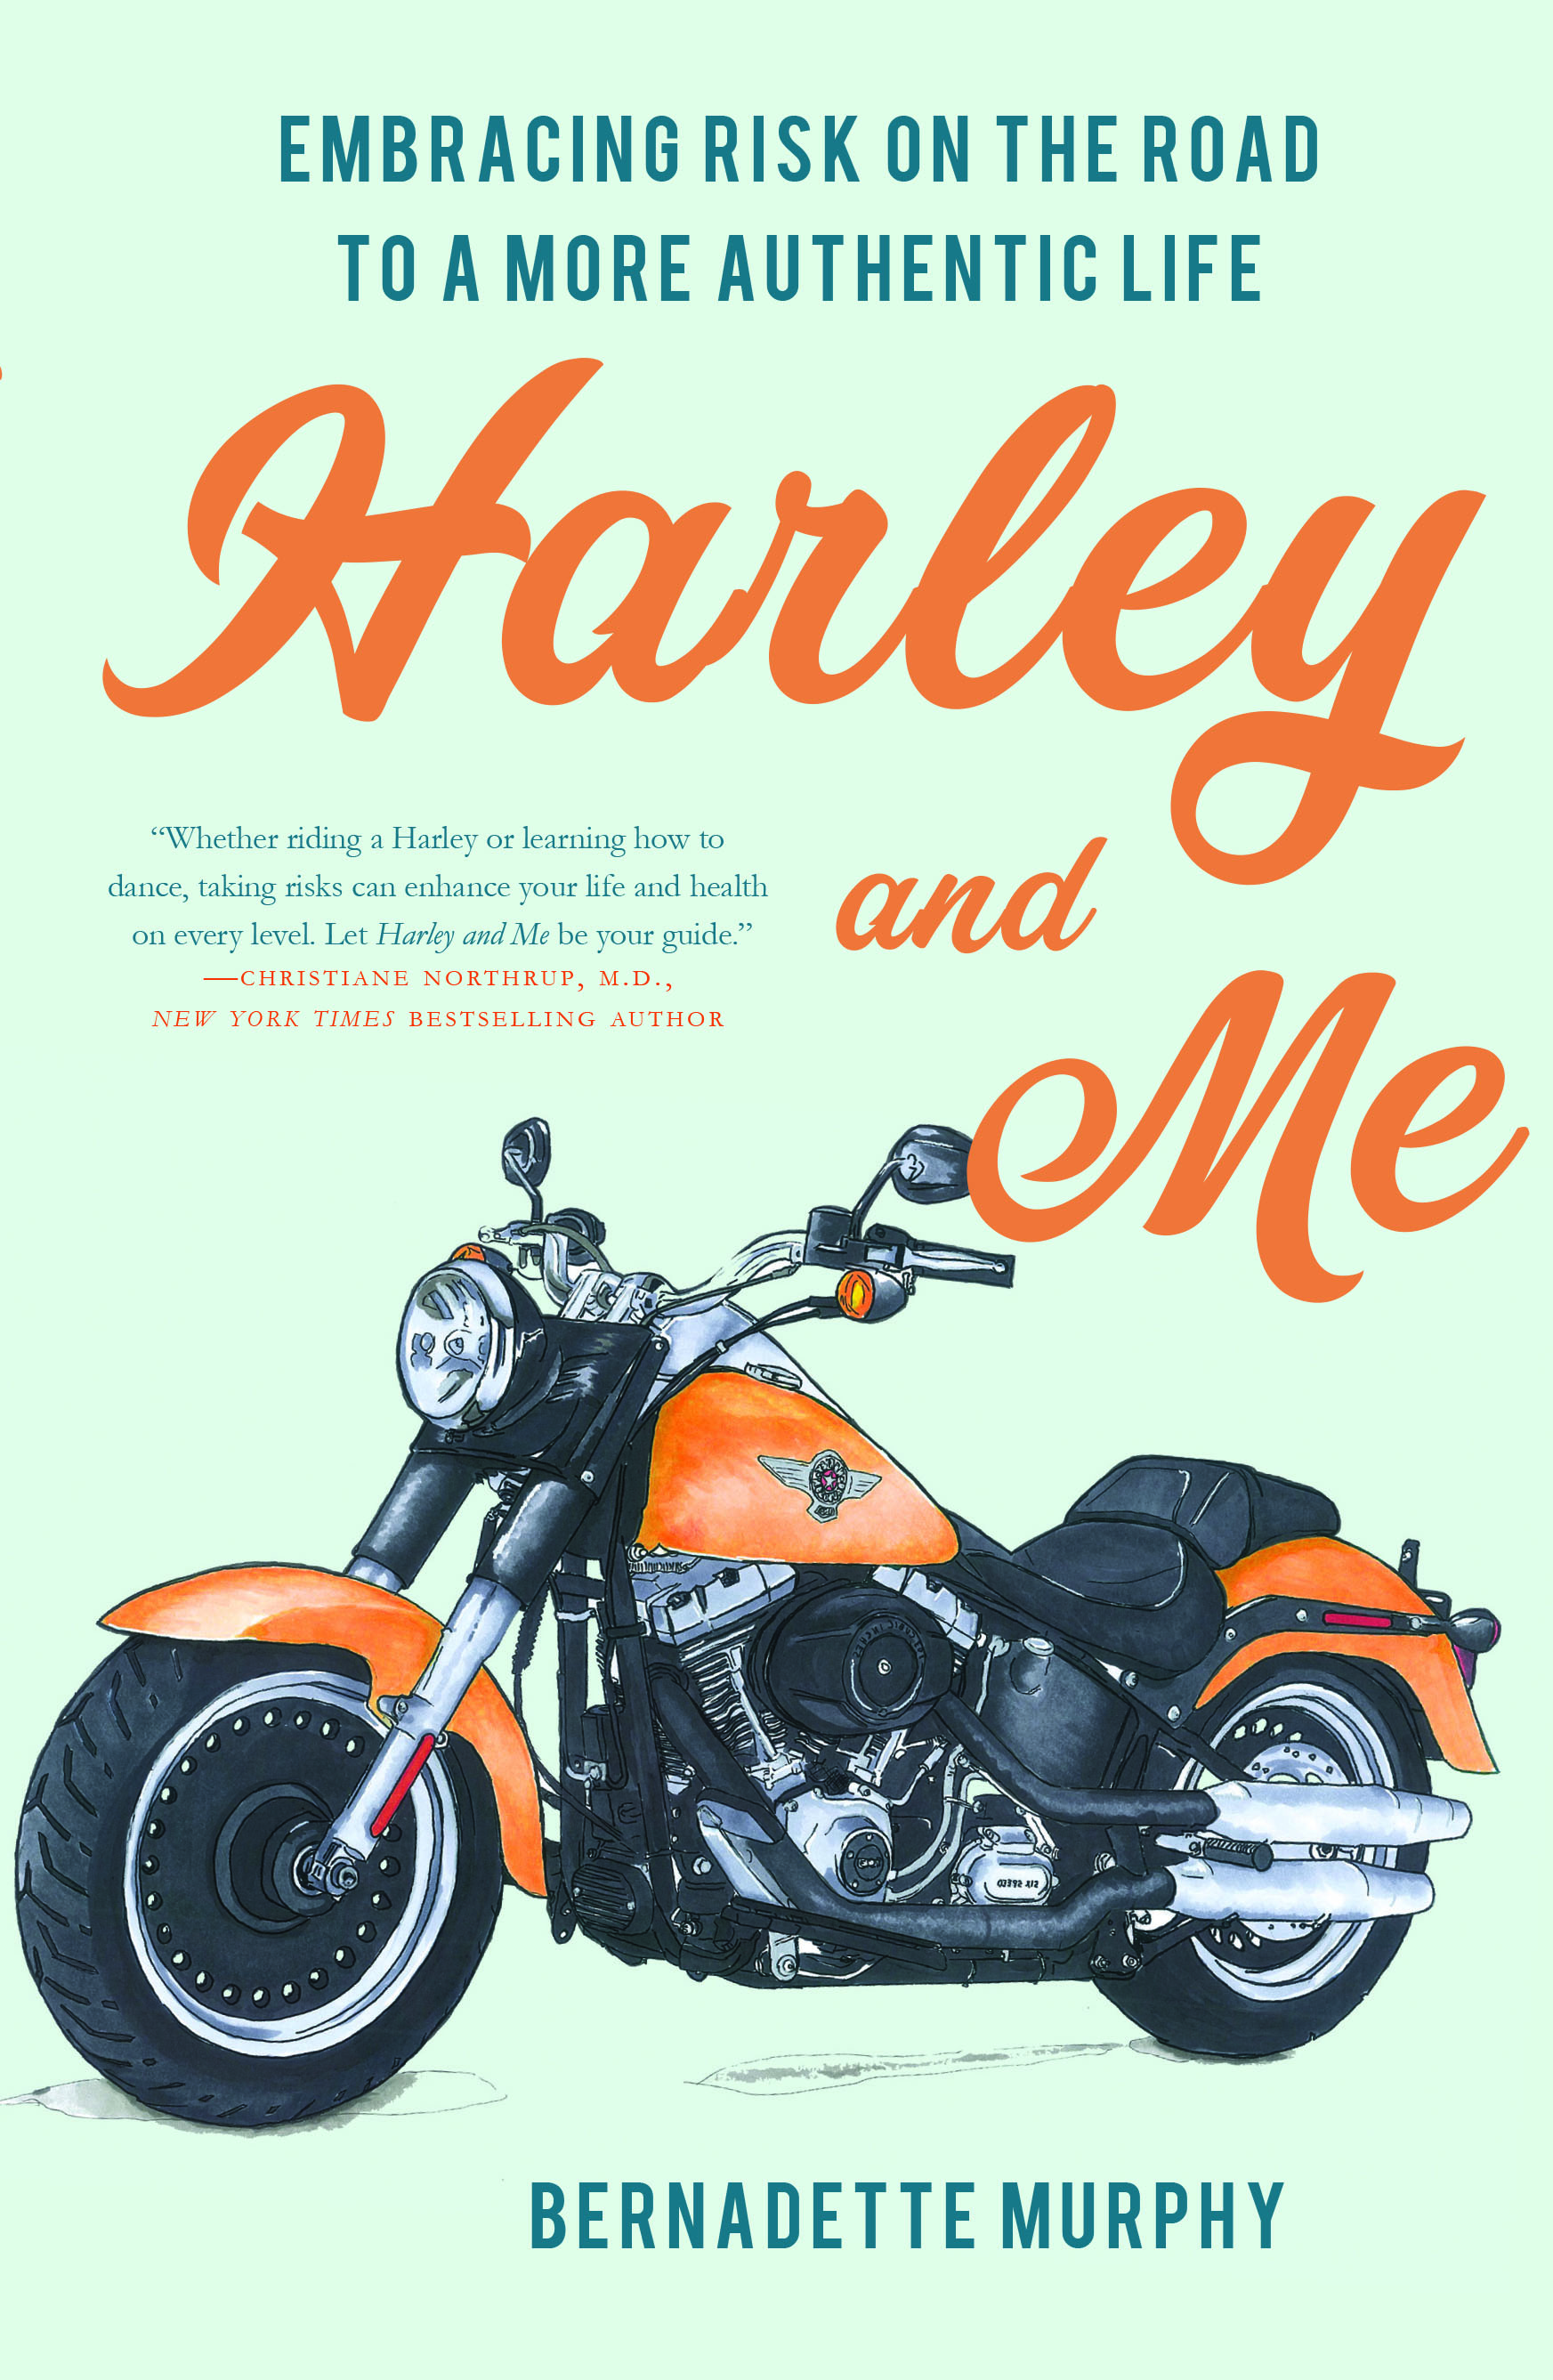 HARLEY AND ME cover image print res (1).jpg